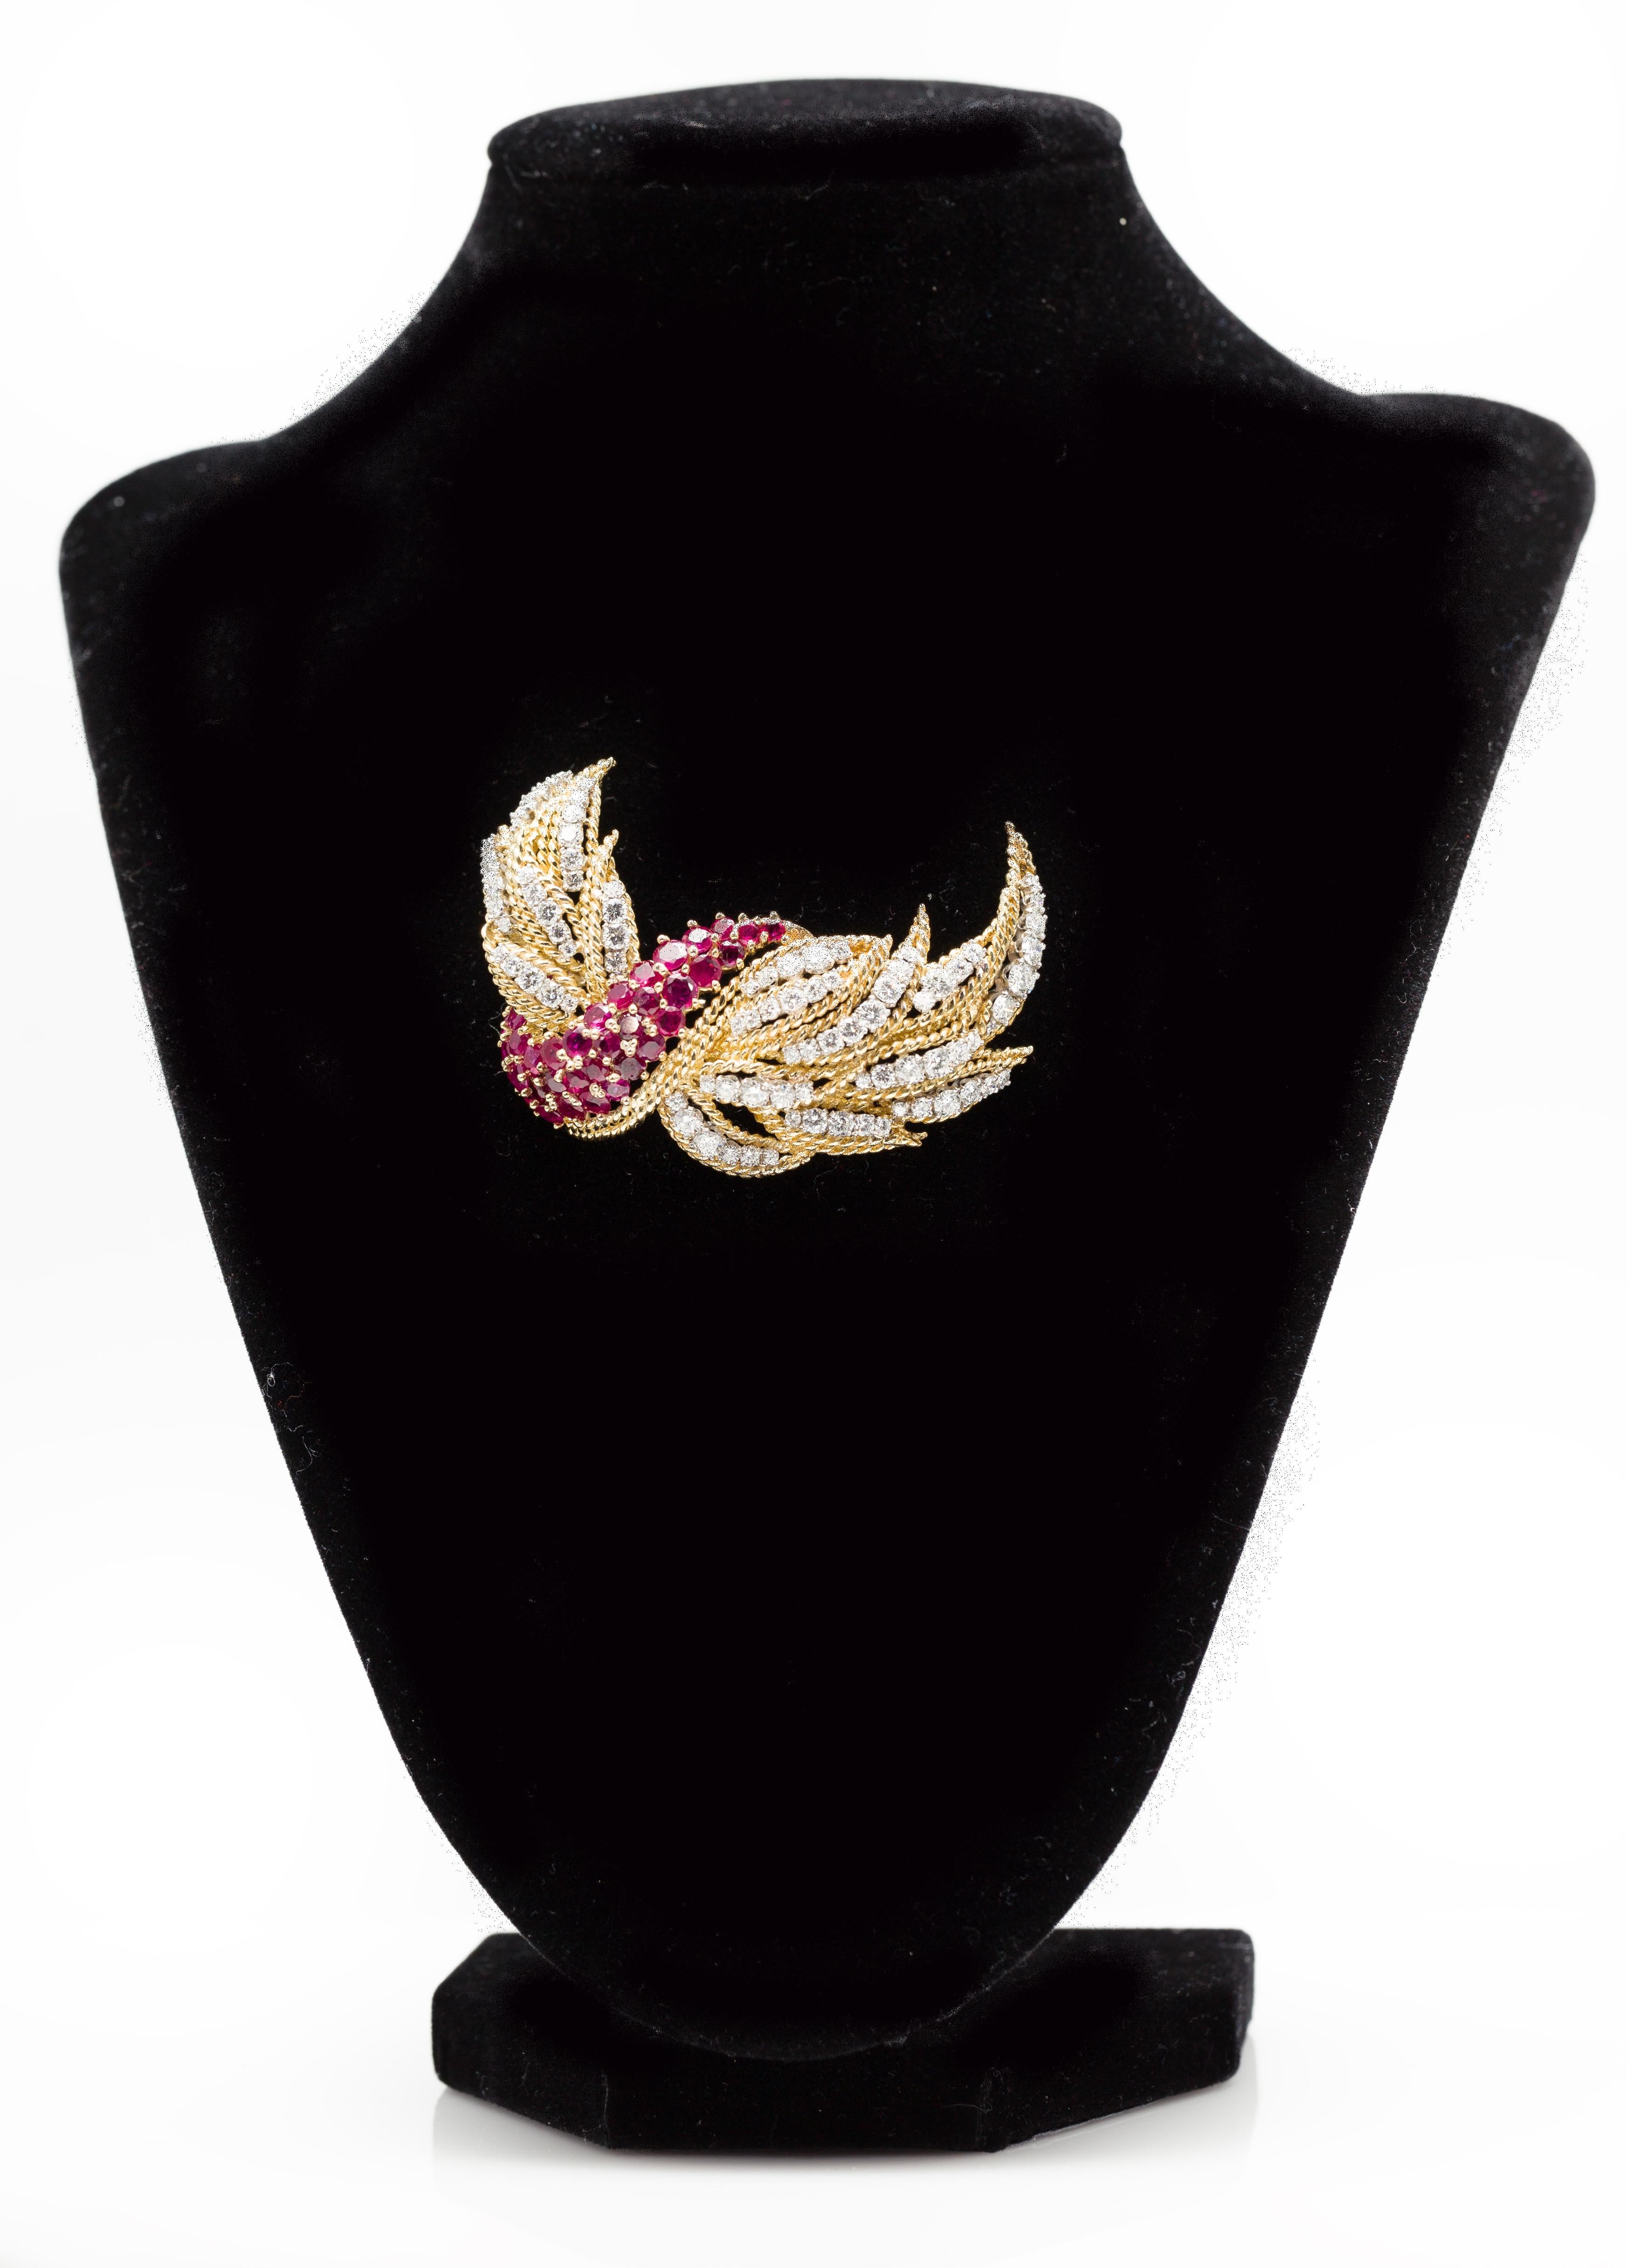 Italian Midcentury Burmese Ruby and Diamond Brooch in 18k Yellow and White Gold In Excellent Condition For Sale In Miami, FL